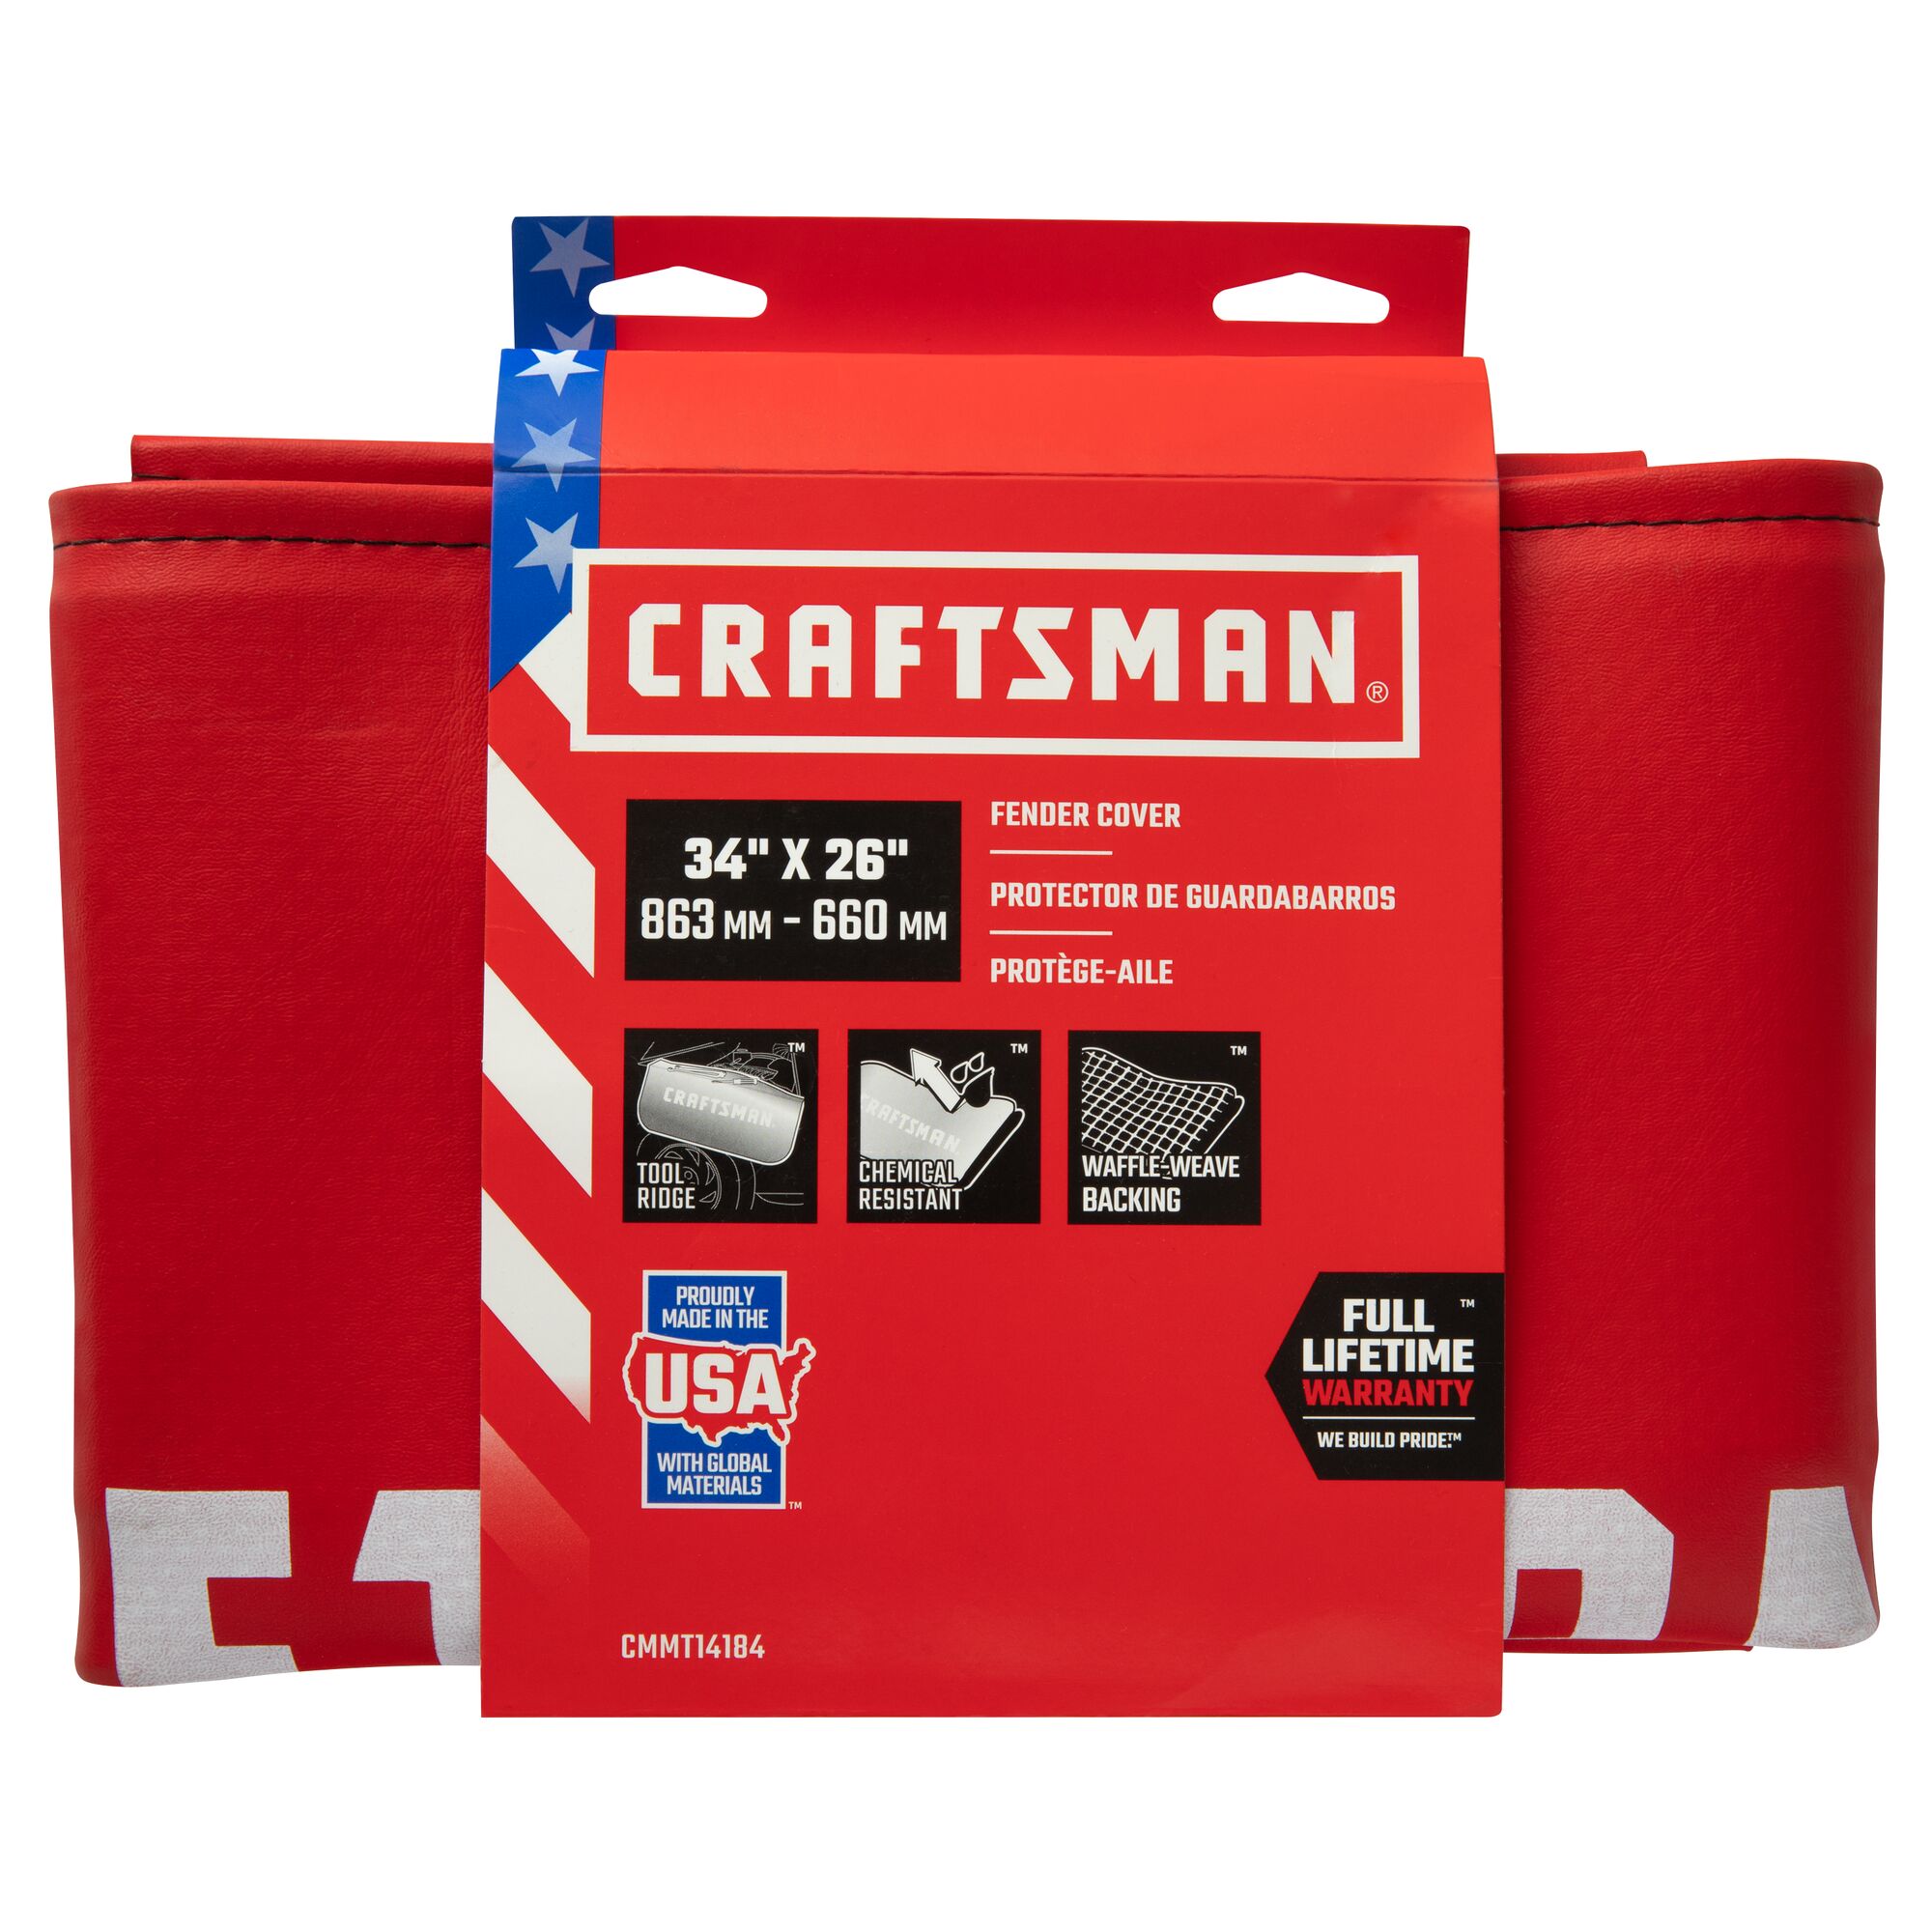 View of CRAFTSMAN Power Train packaging